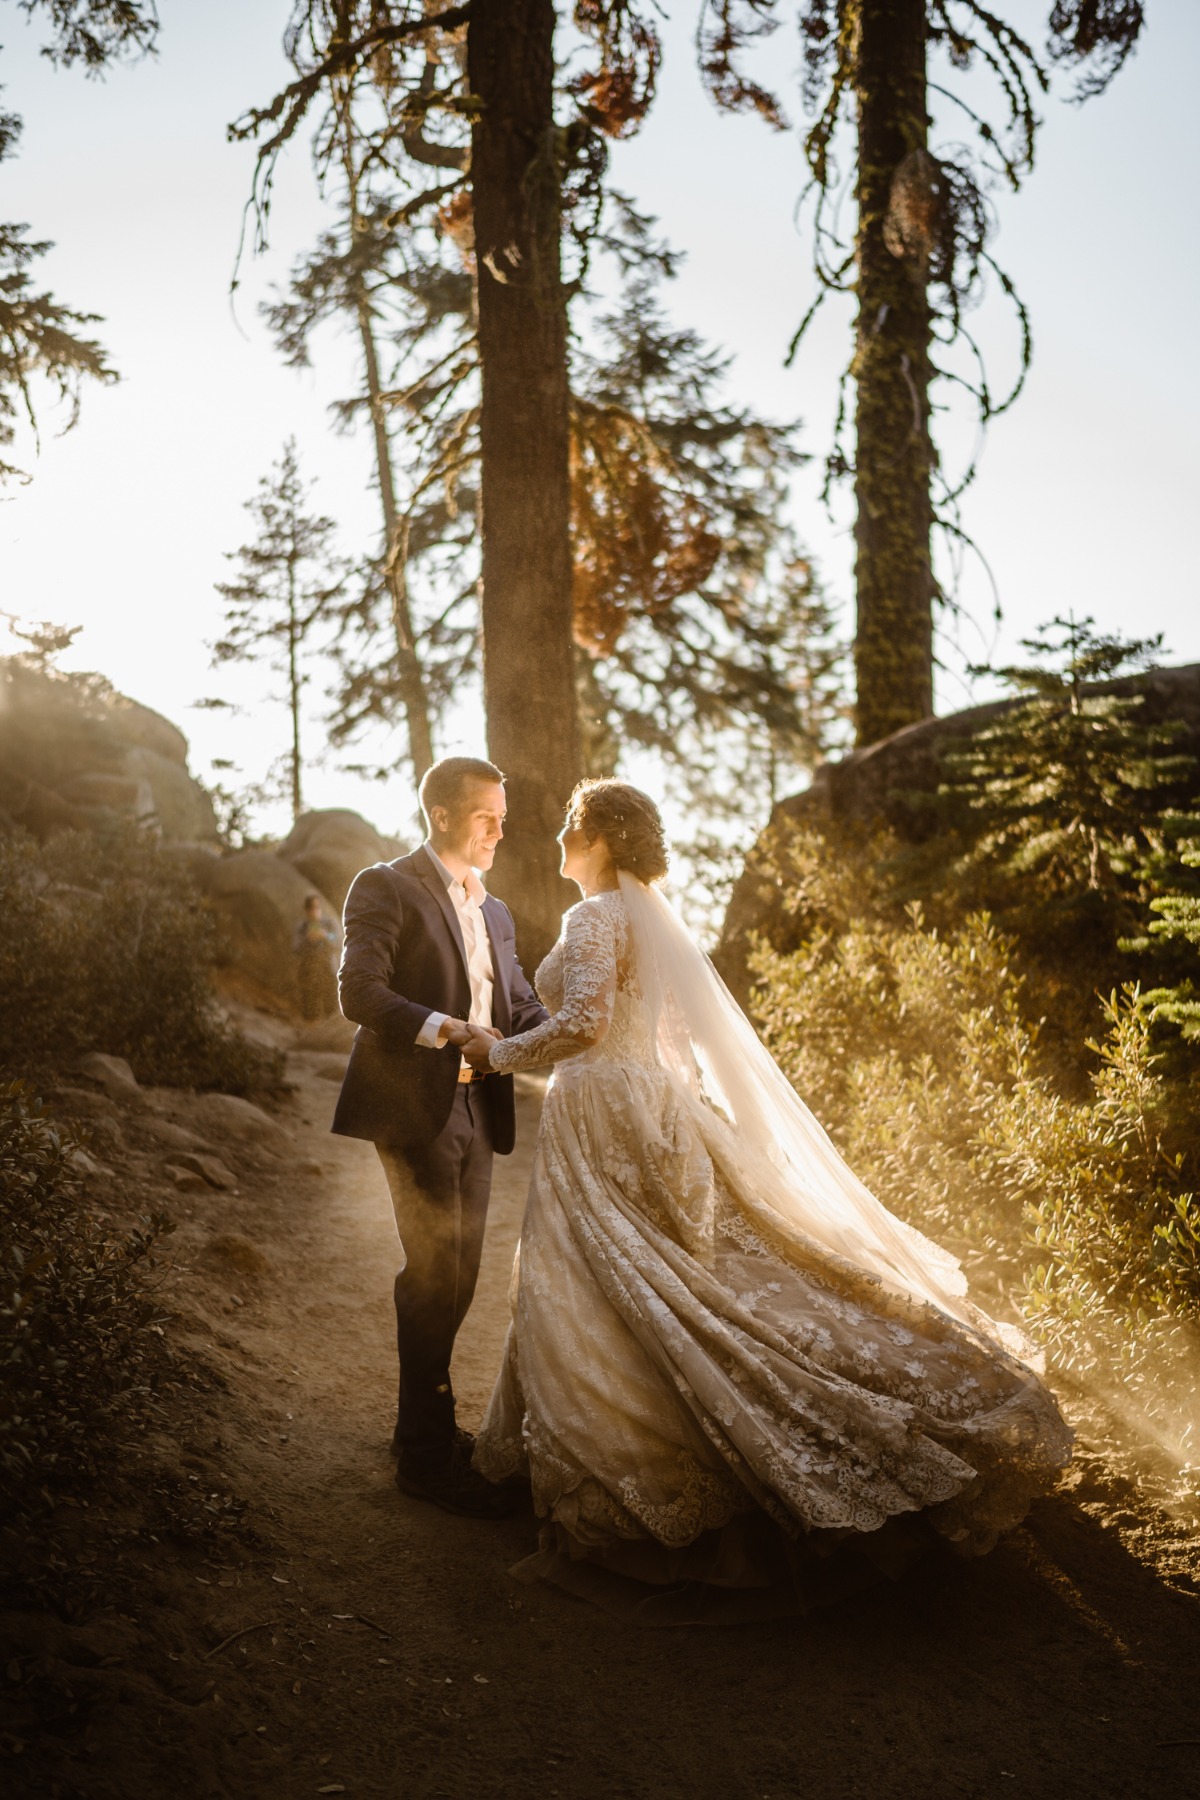 How To Have A Breathtaking Elopement In Yosemite